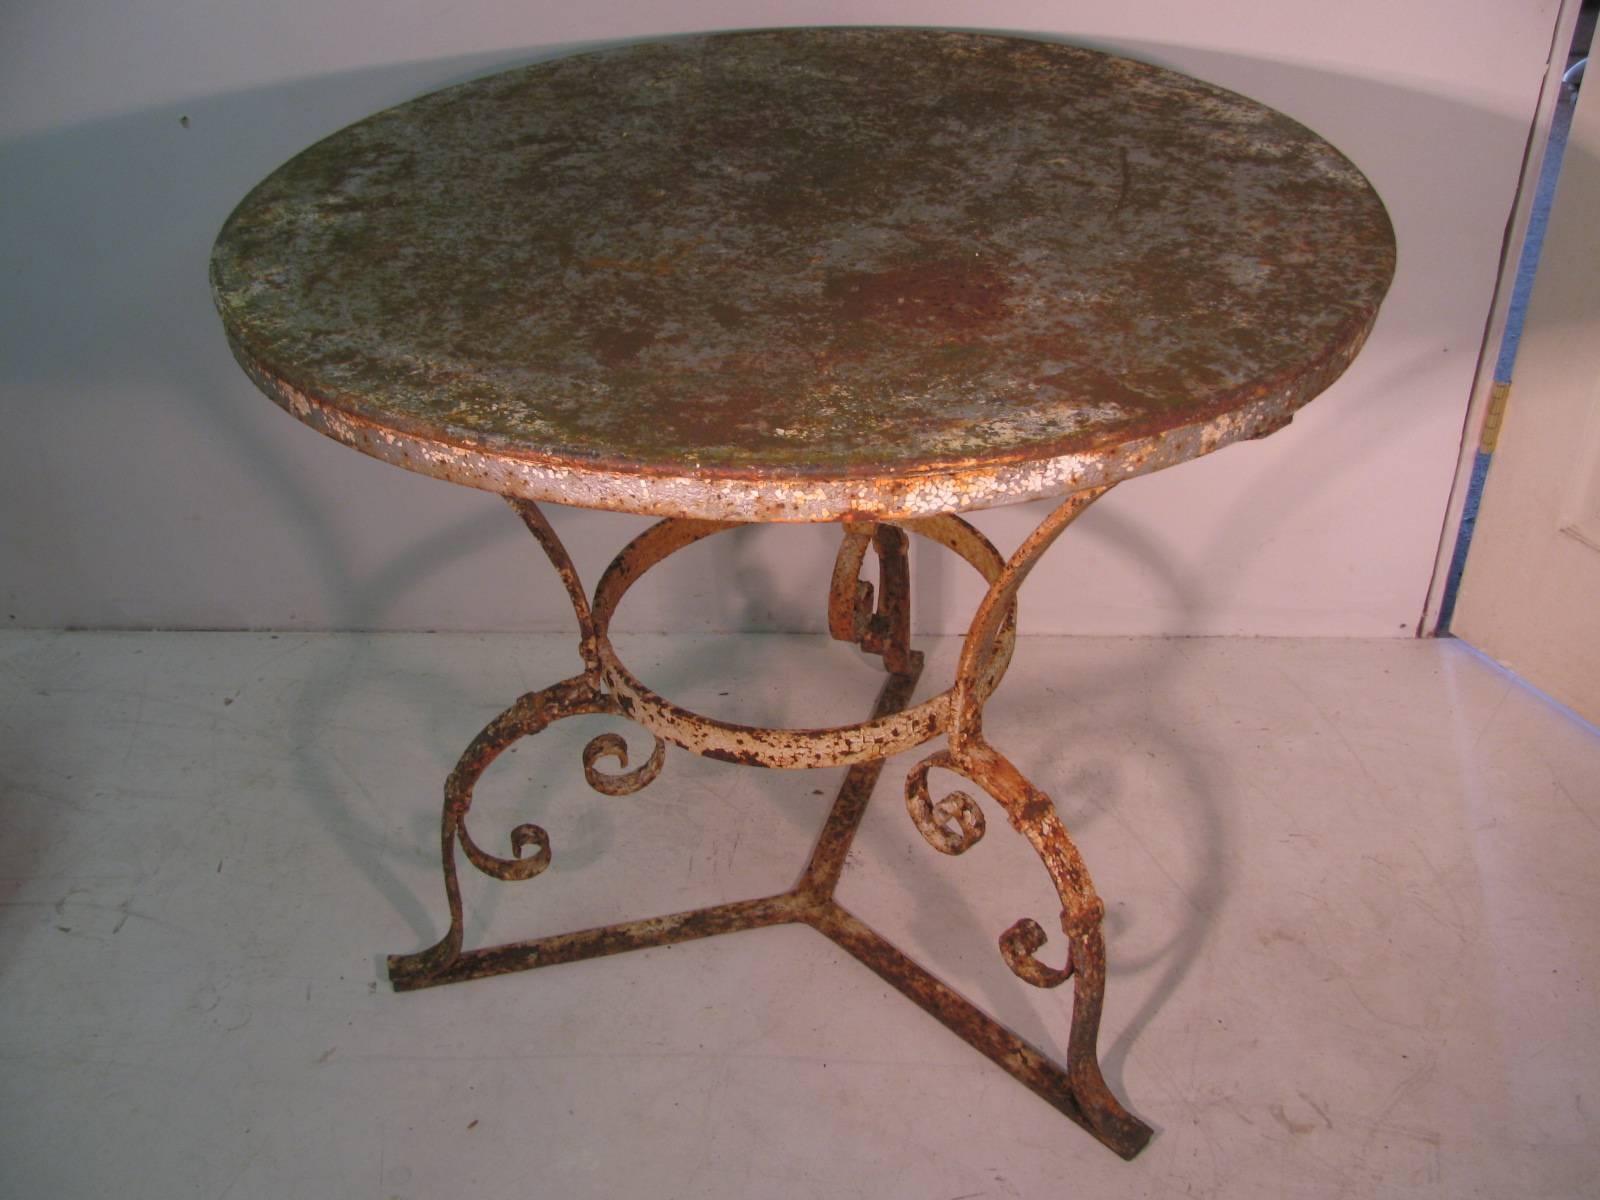 Fabulous round garden table suitable indoors or out. Heavy wrought iron base with scroll work on tripod. Heavy sheet metal top with all the original patina, some paint some rust. Hand riveted together. Top has been lightly sanded to remove any loose